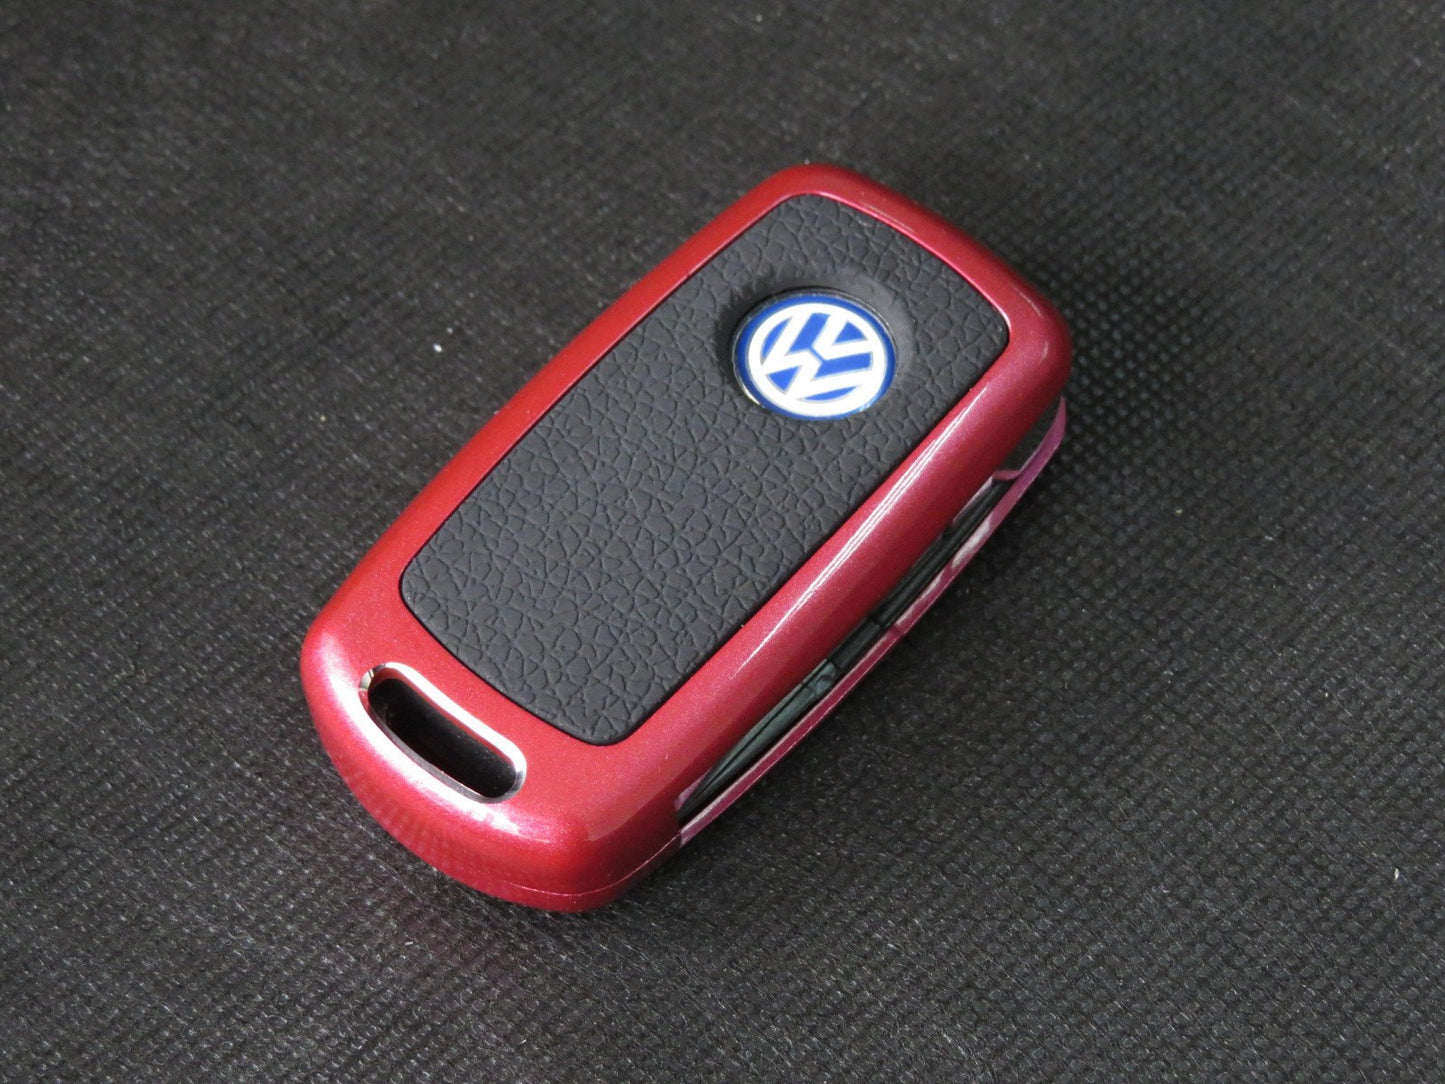 Deluxe Metal Remote Flip Key Cover Case Skin Shell for VW Volkswagen Seat Skoda - Pinalloy Online Auto Accessories Lightweight Car Kit 